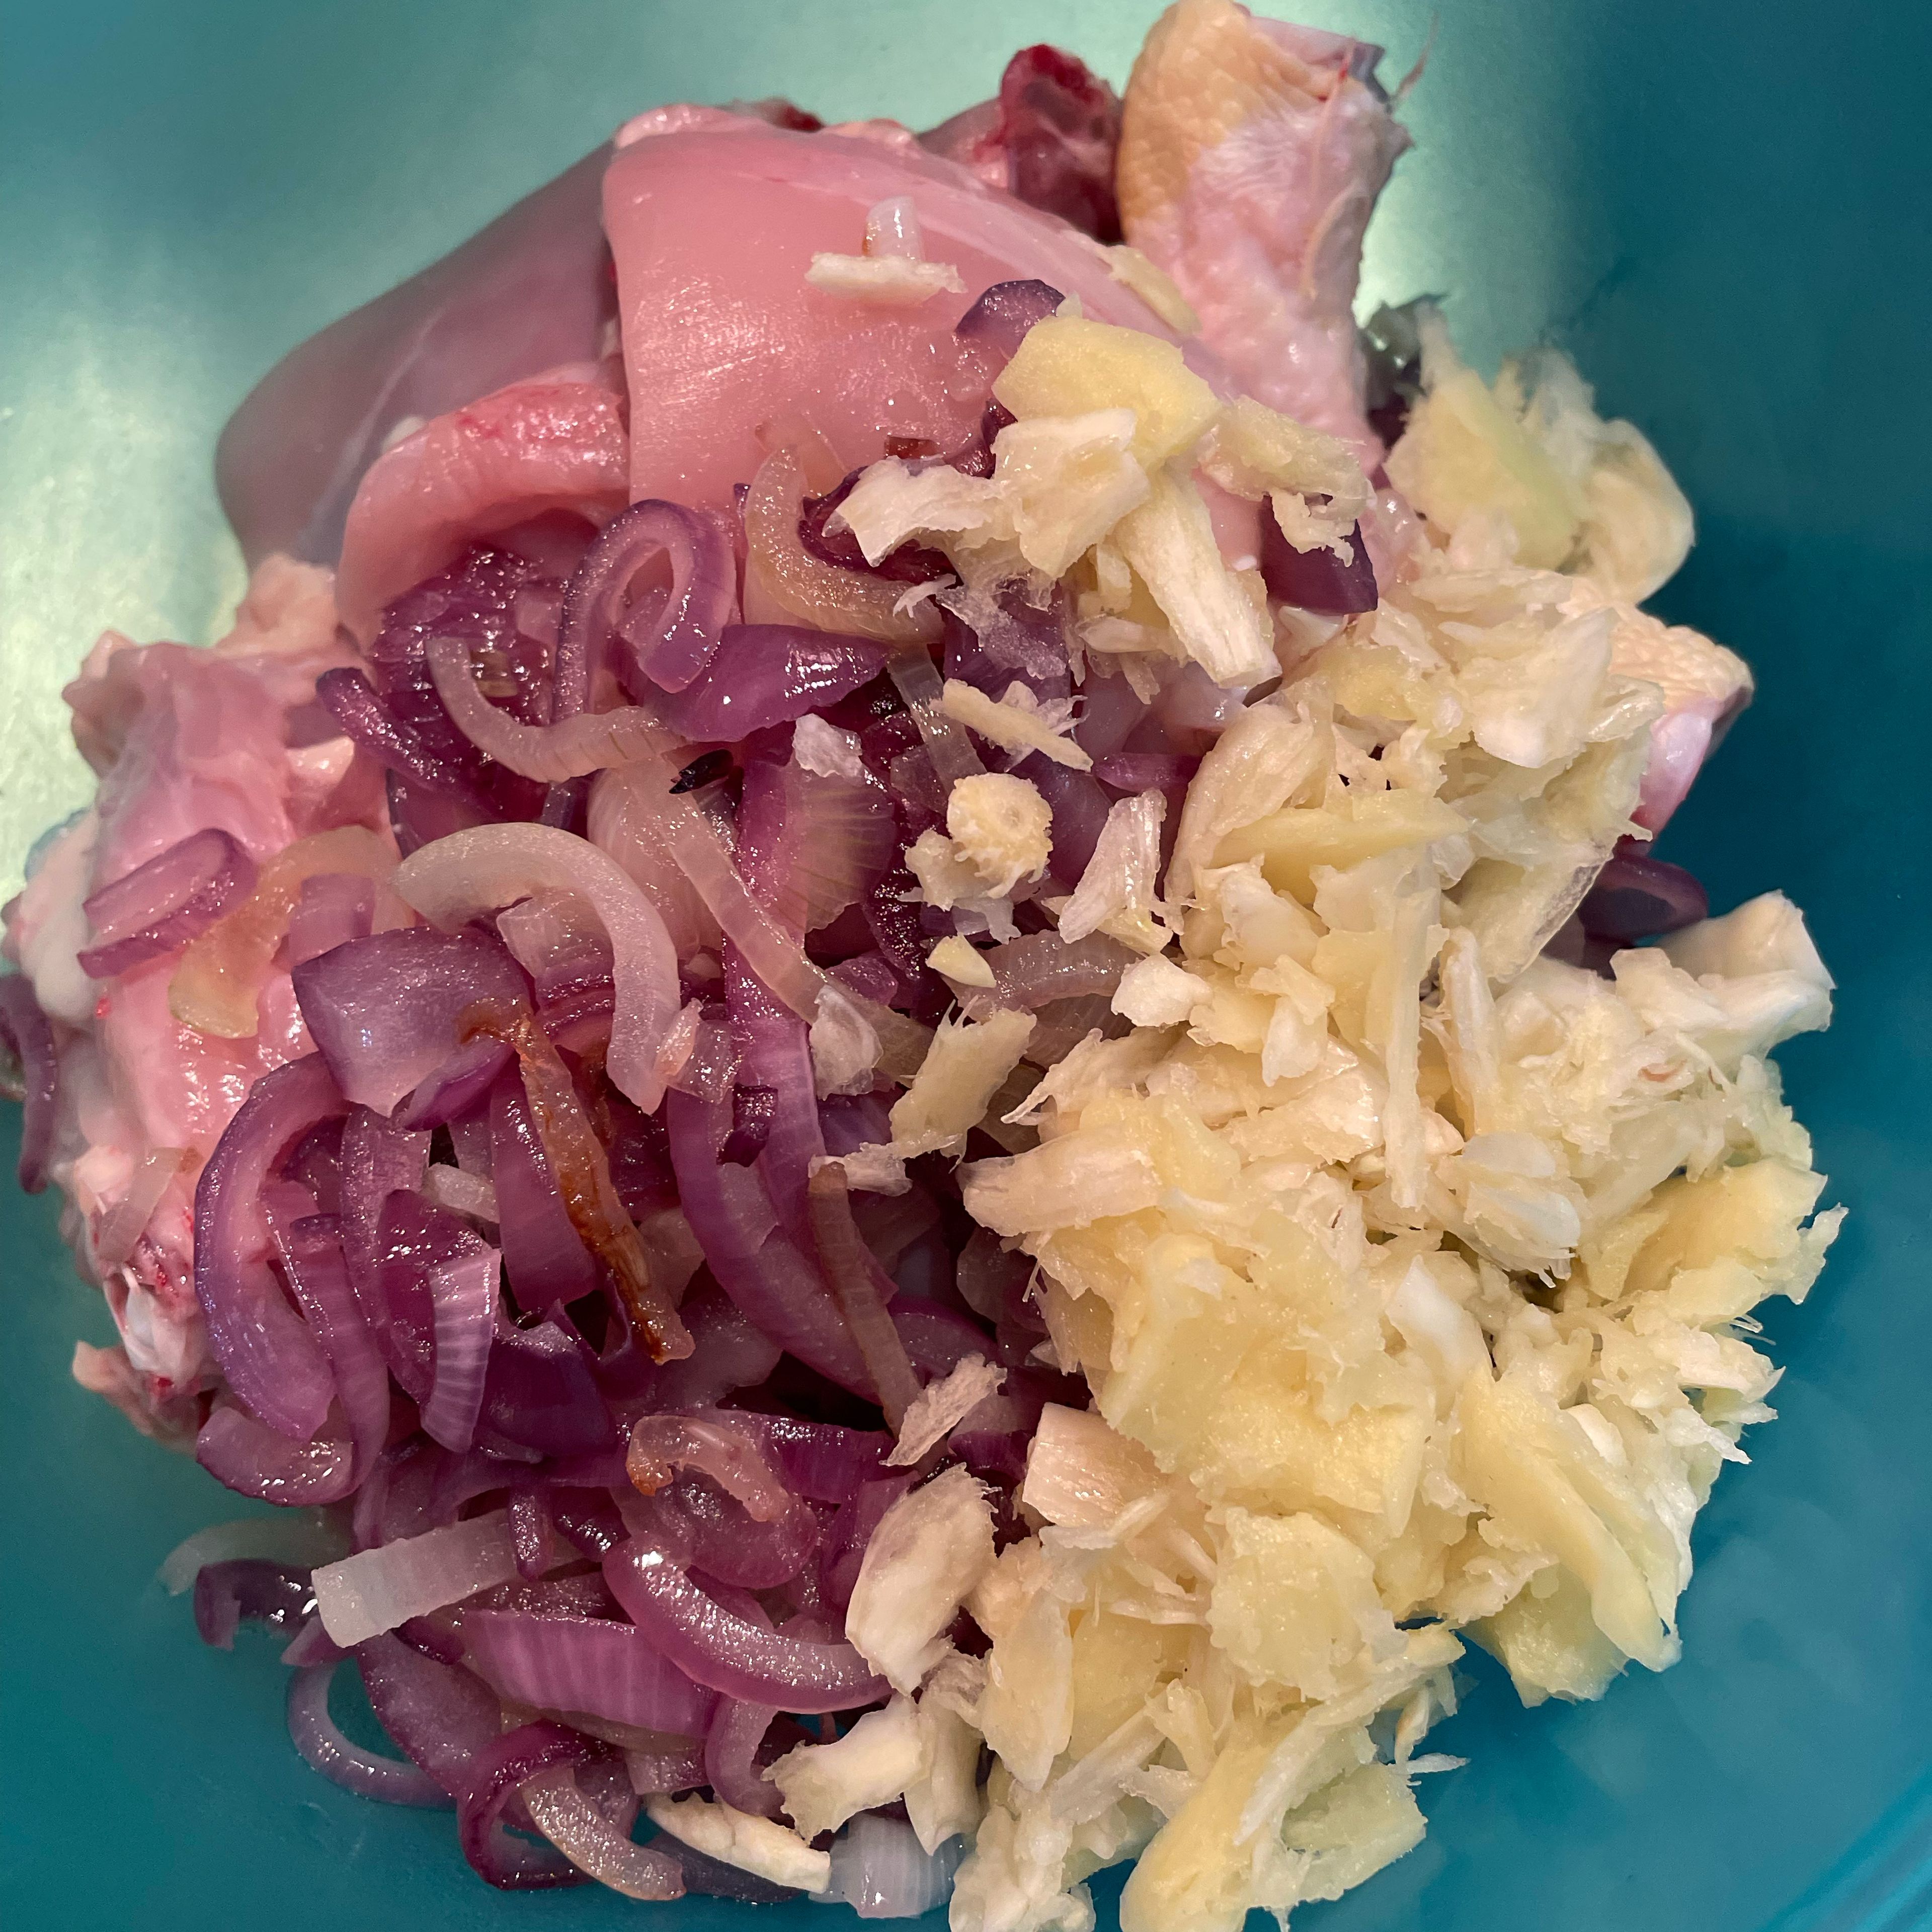 Slice onions and fry in coconut oil until golden brown. Remove from oil with a slotted spoon and place the fried onion on top of the chicken. Peel and mash ginger and garlic with a pestle. Place on top of chicken.